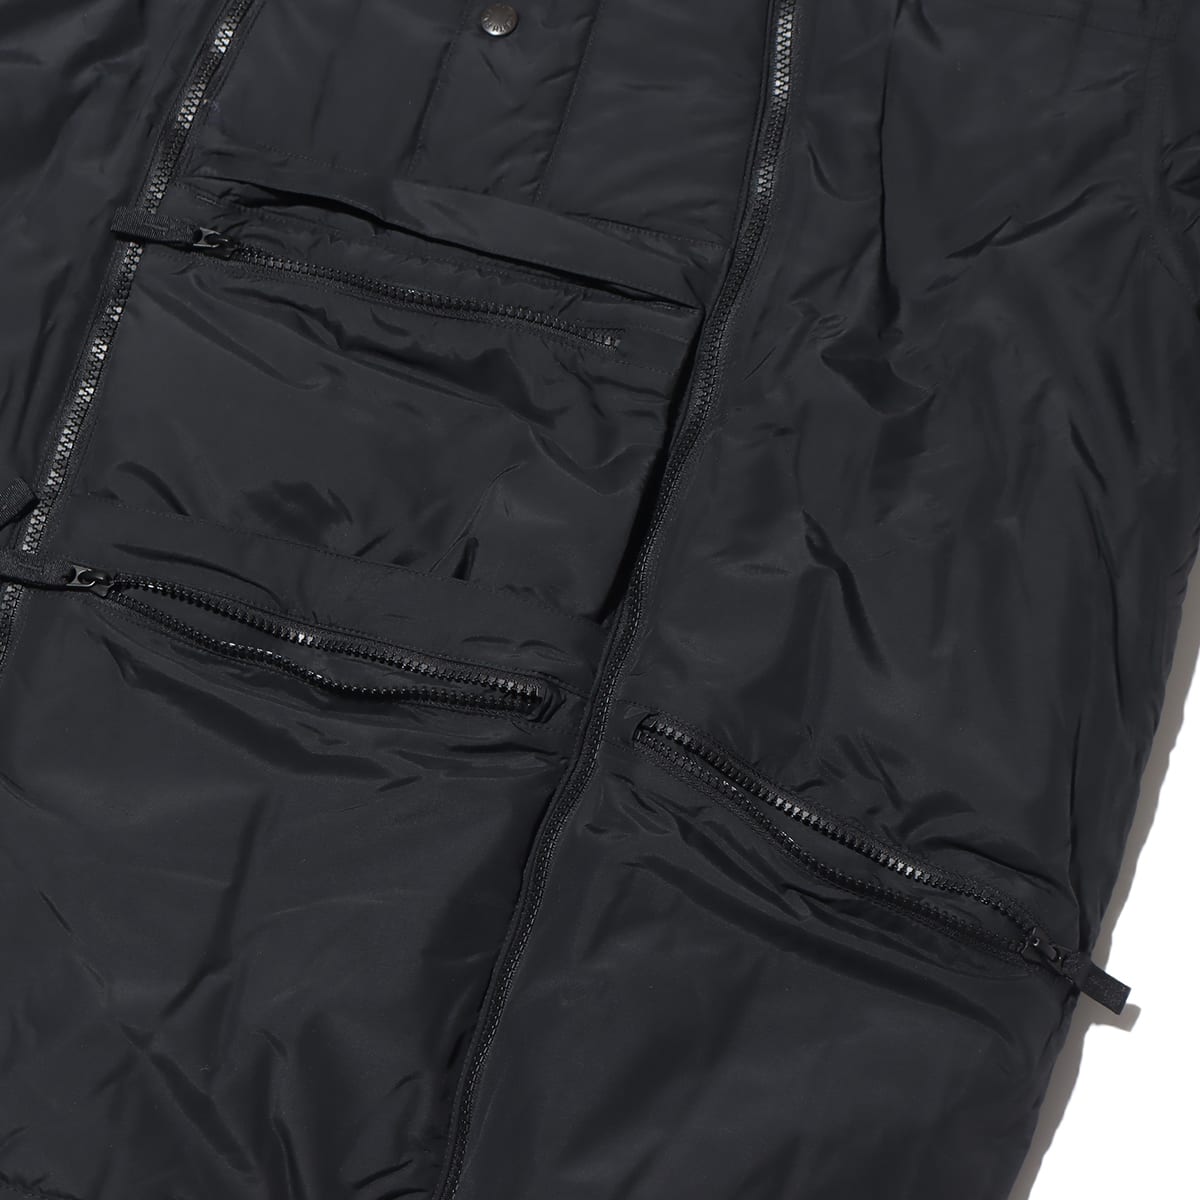 THE NORTH FACE CR INSULATION JACKET BLACK 23FW-I